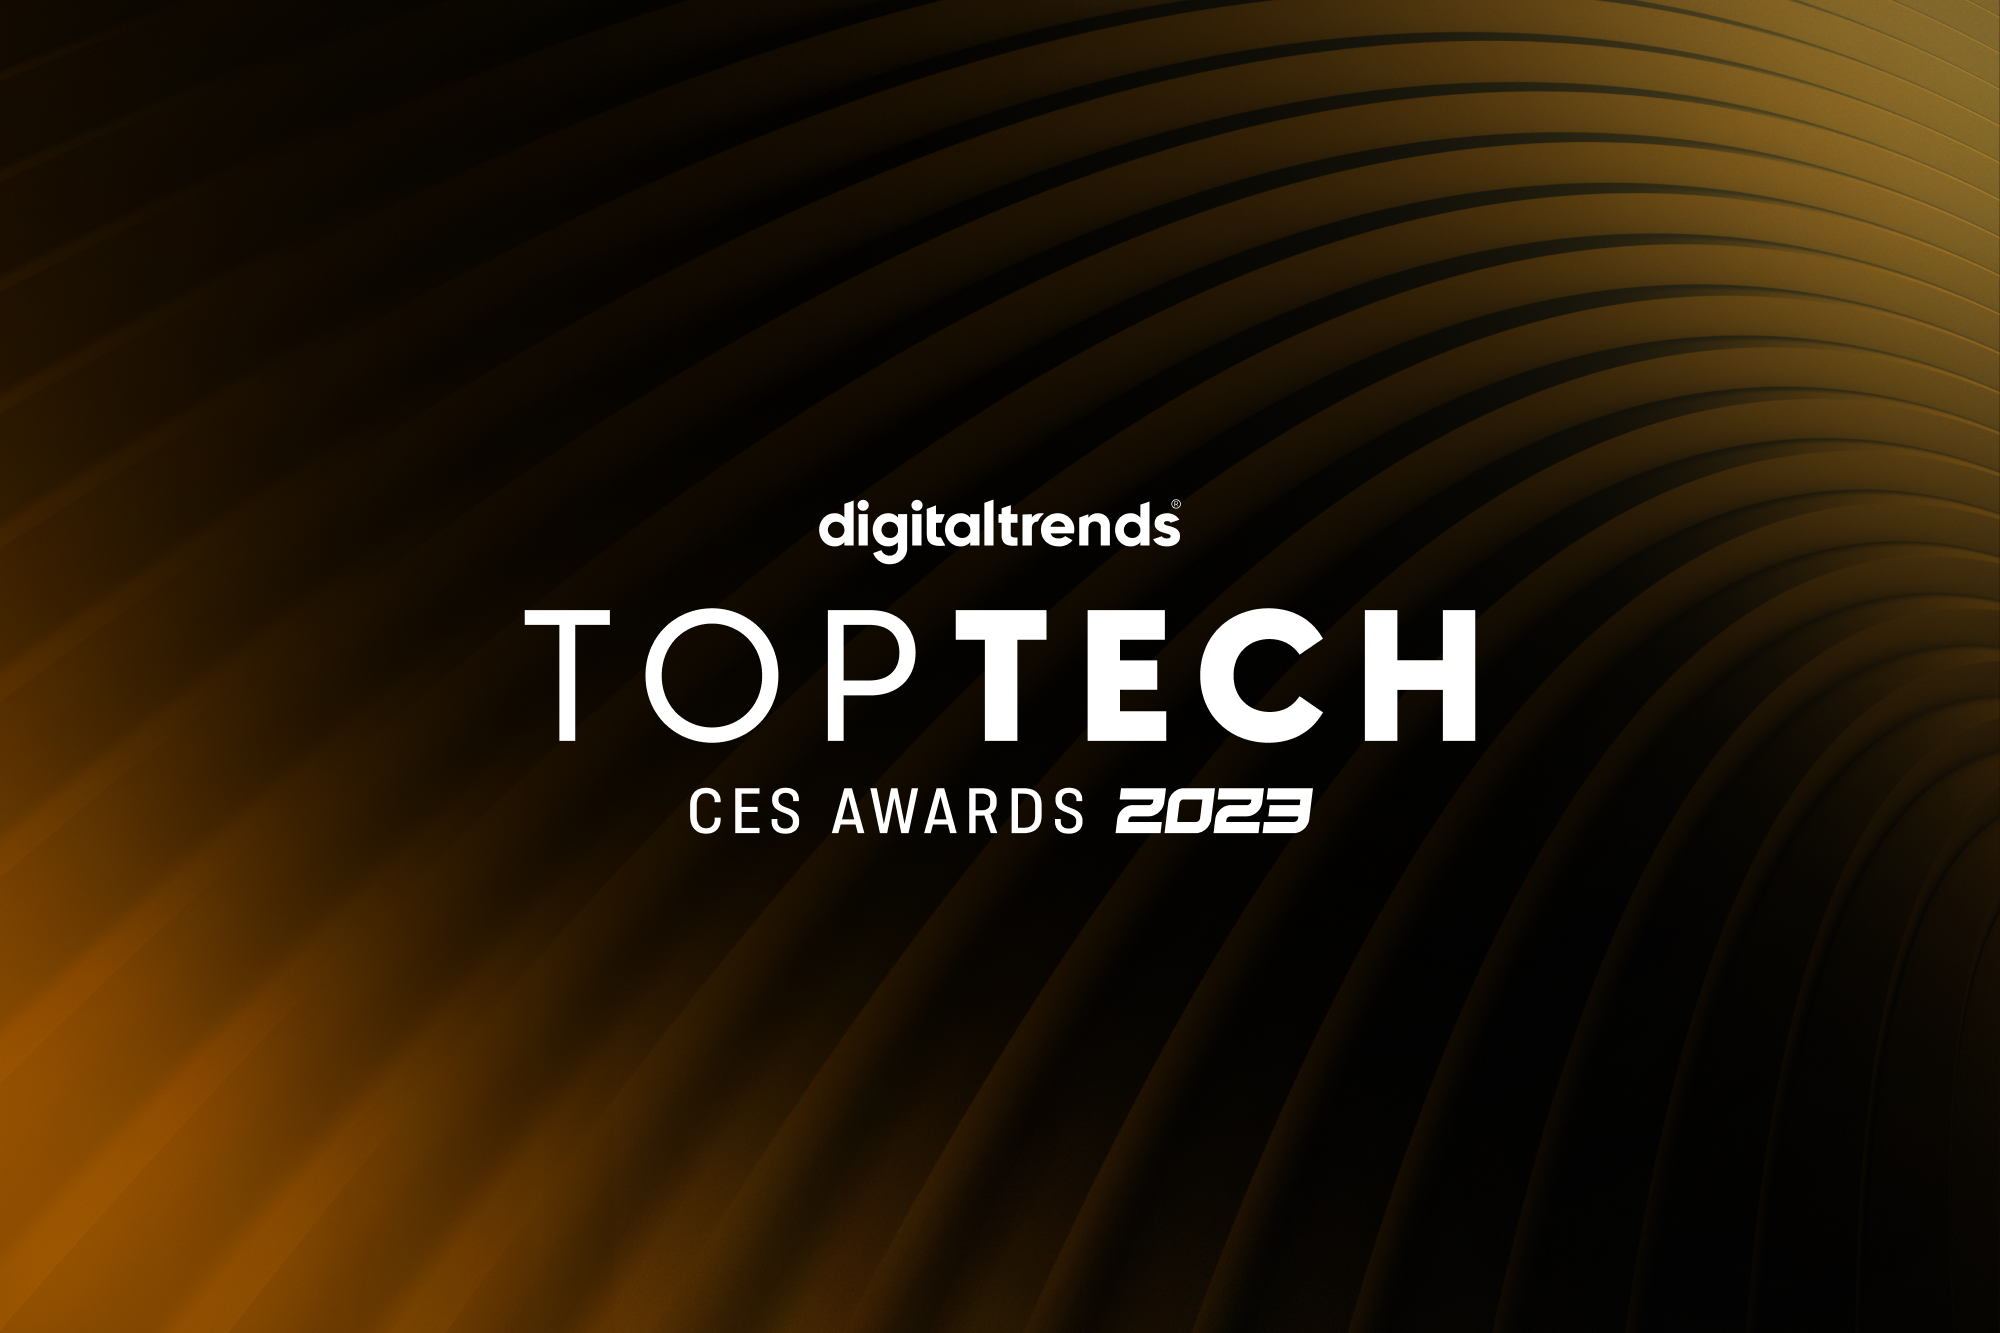 https://www.digitaltrends.com/wp-content/uploads/2023/01/Best-of-CES-2023-Awards-Our-Top-Tech-from-the-Show-Feature.png?p=1